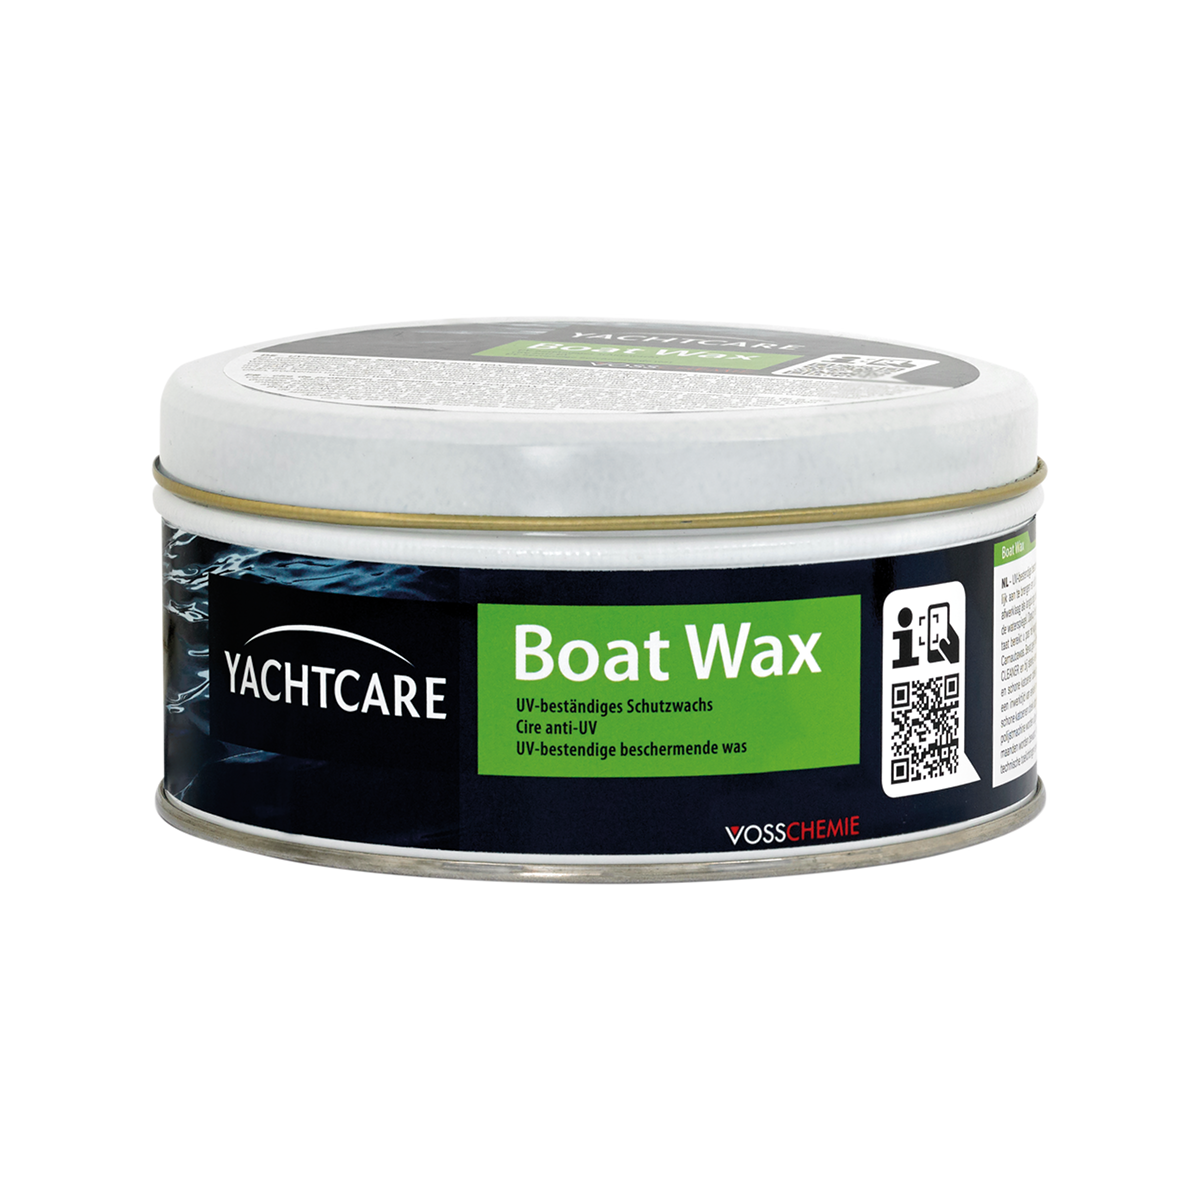 Yachtcare Boat Wax bootwas - 200g